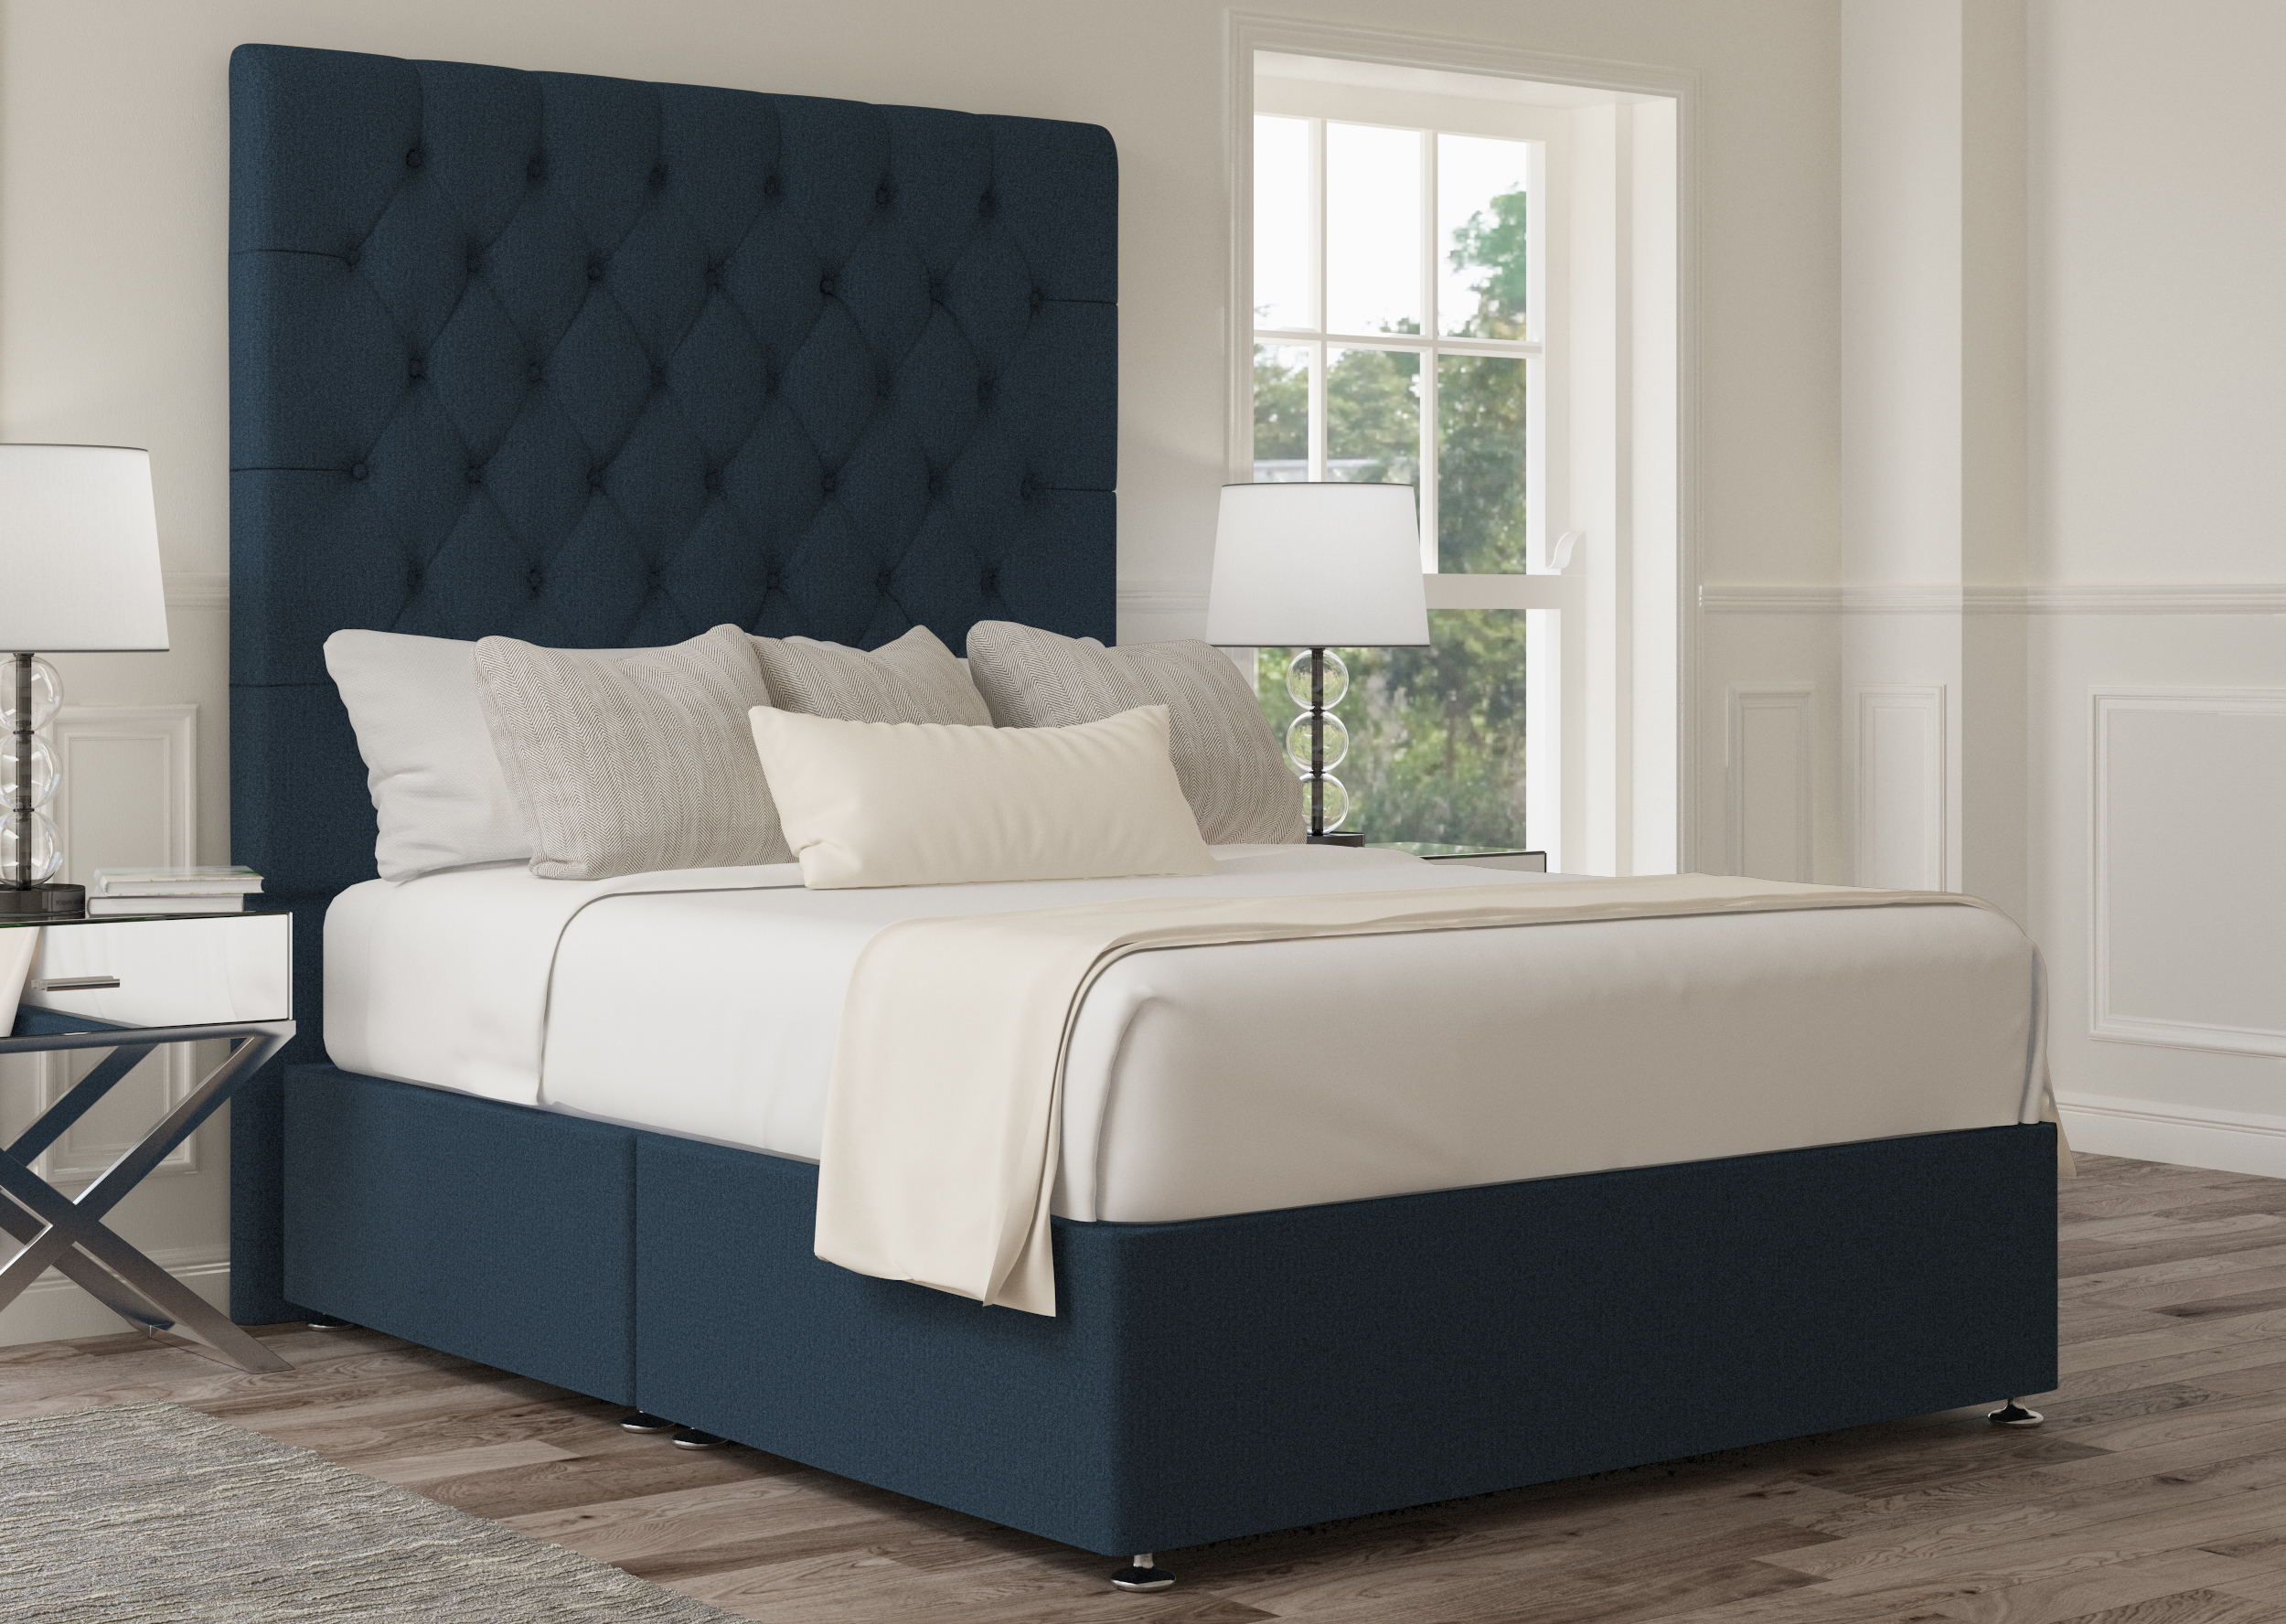 View Sephora Arran Cyan Upholstered Double Bed Time4Sleep information